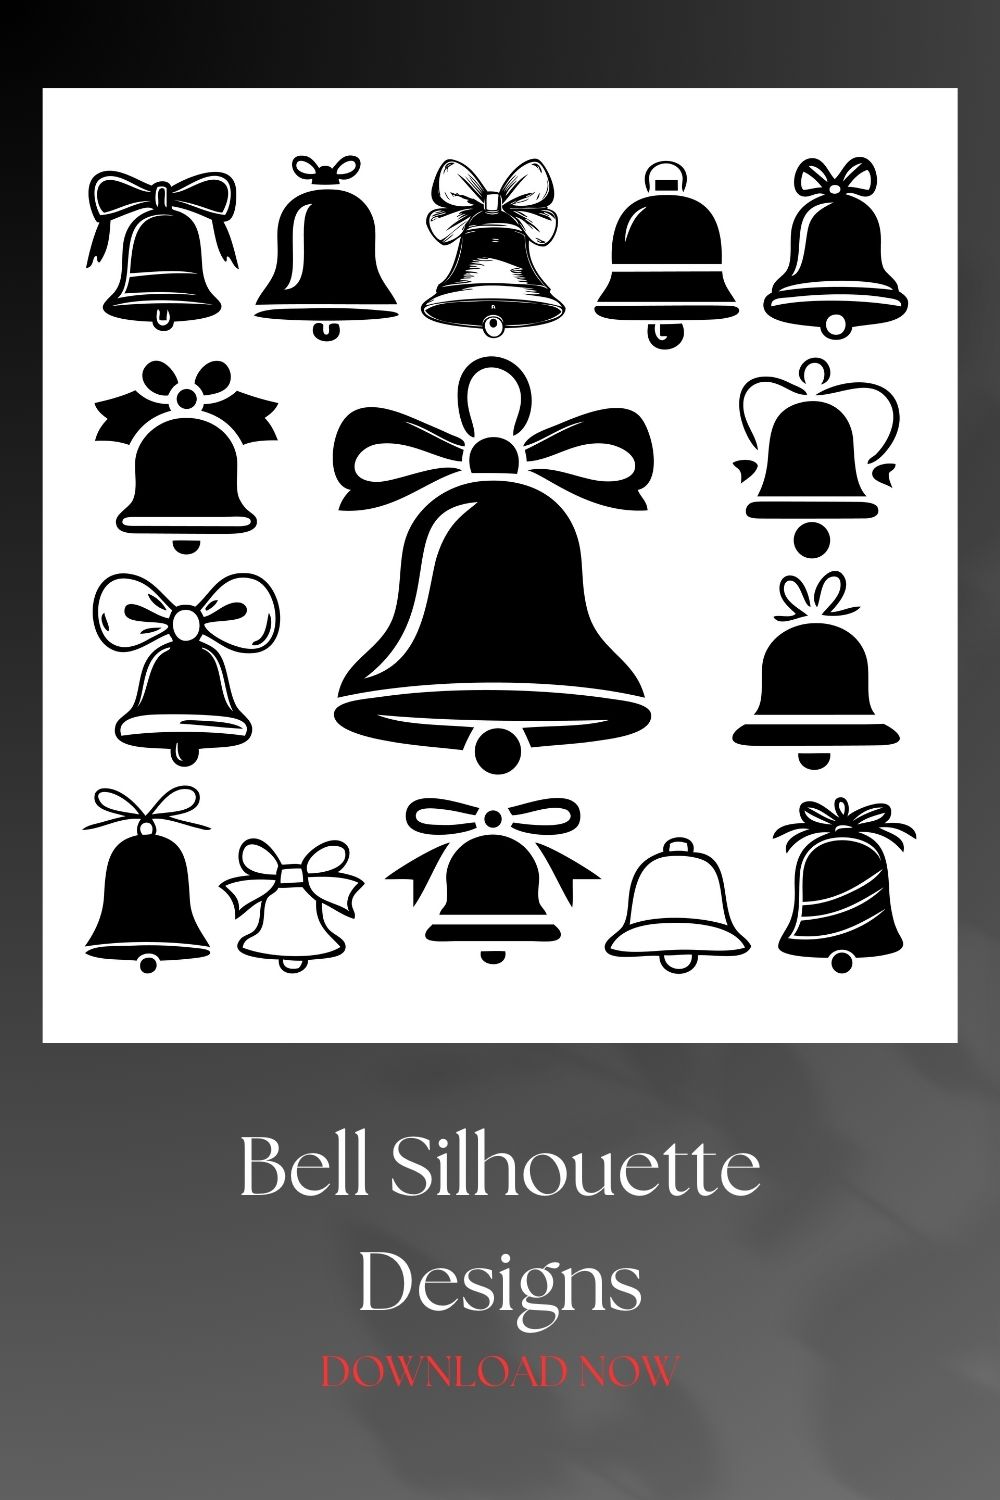 Bell Silhouette Designs for Christmas Decoration pinterest preview image.